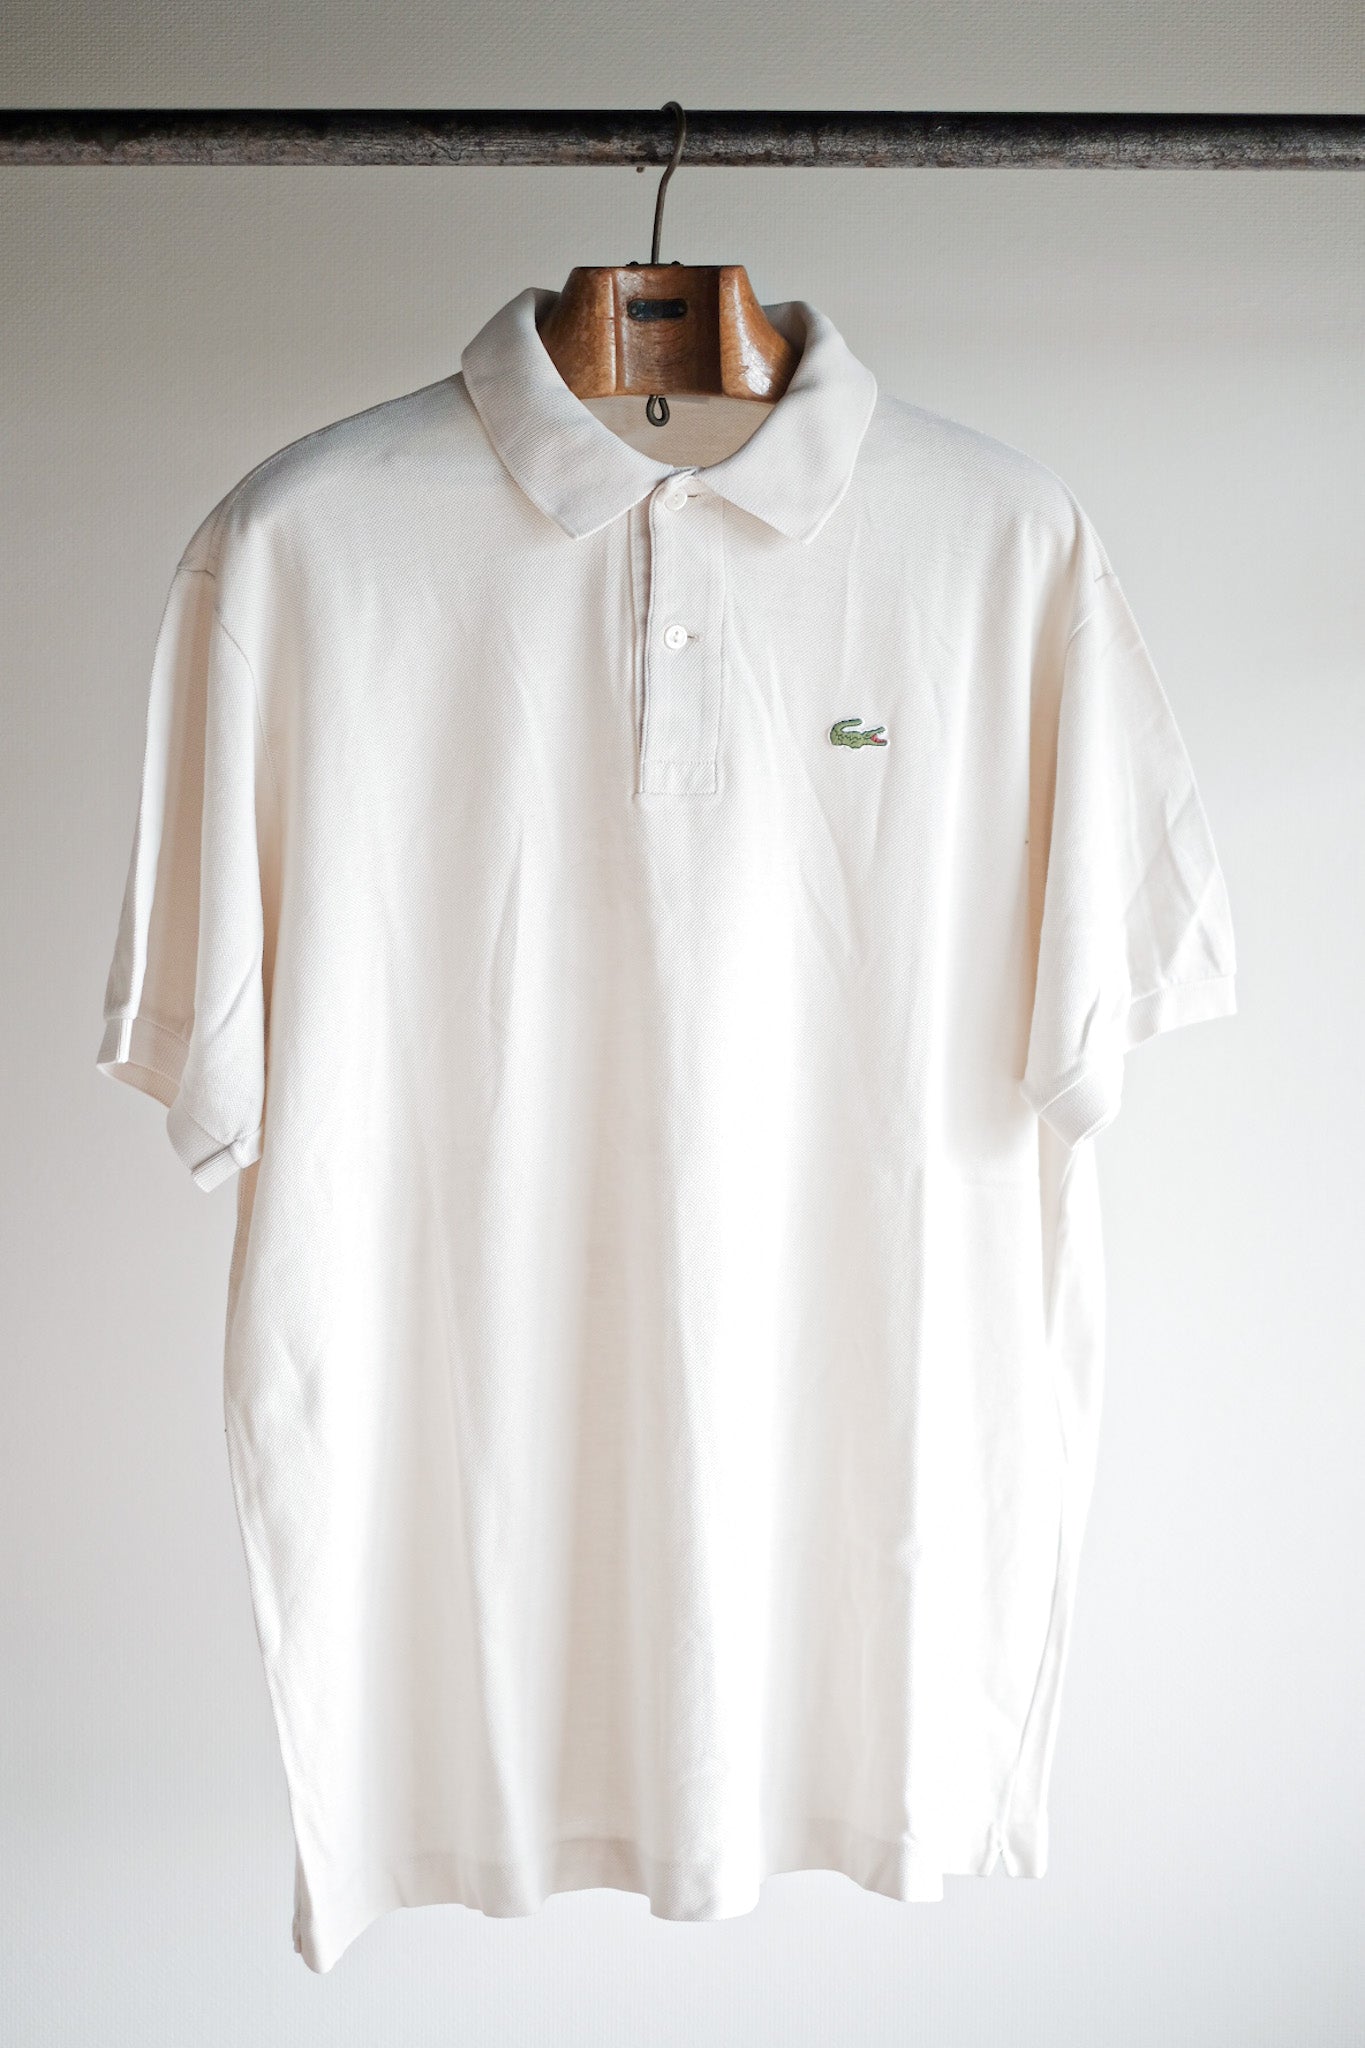 [~ 80's] CHEMISE LACOSTE S/S POLO SHIRT SIRT SIZE.7 "ECRU"